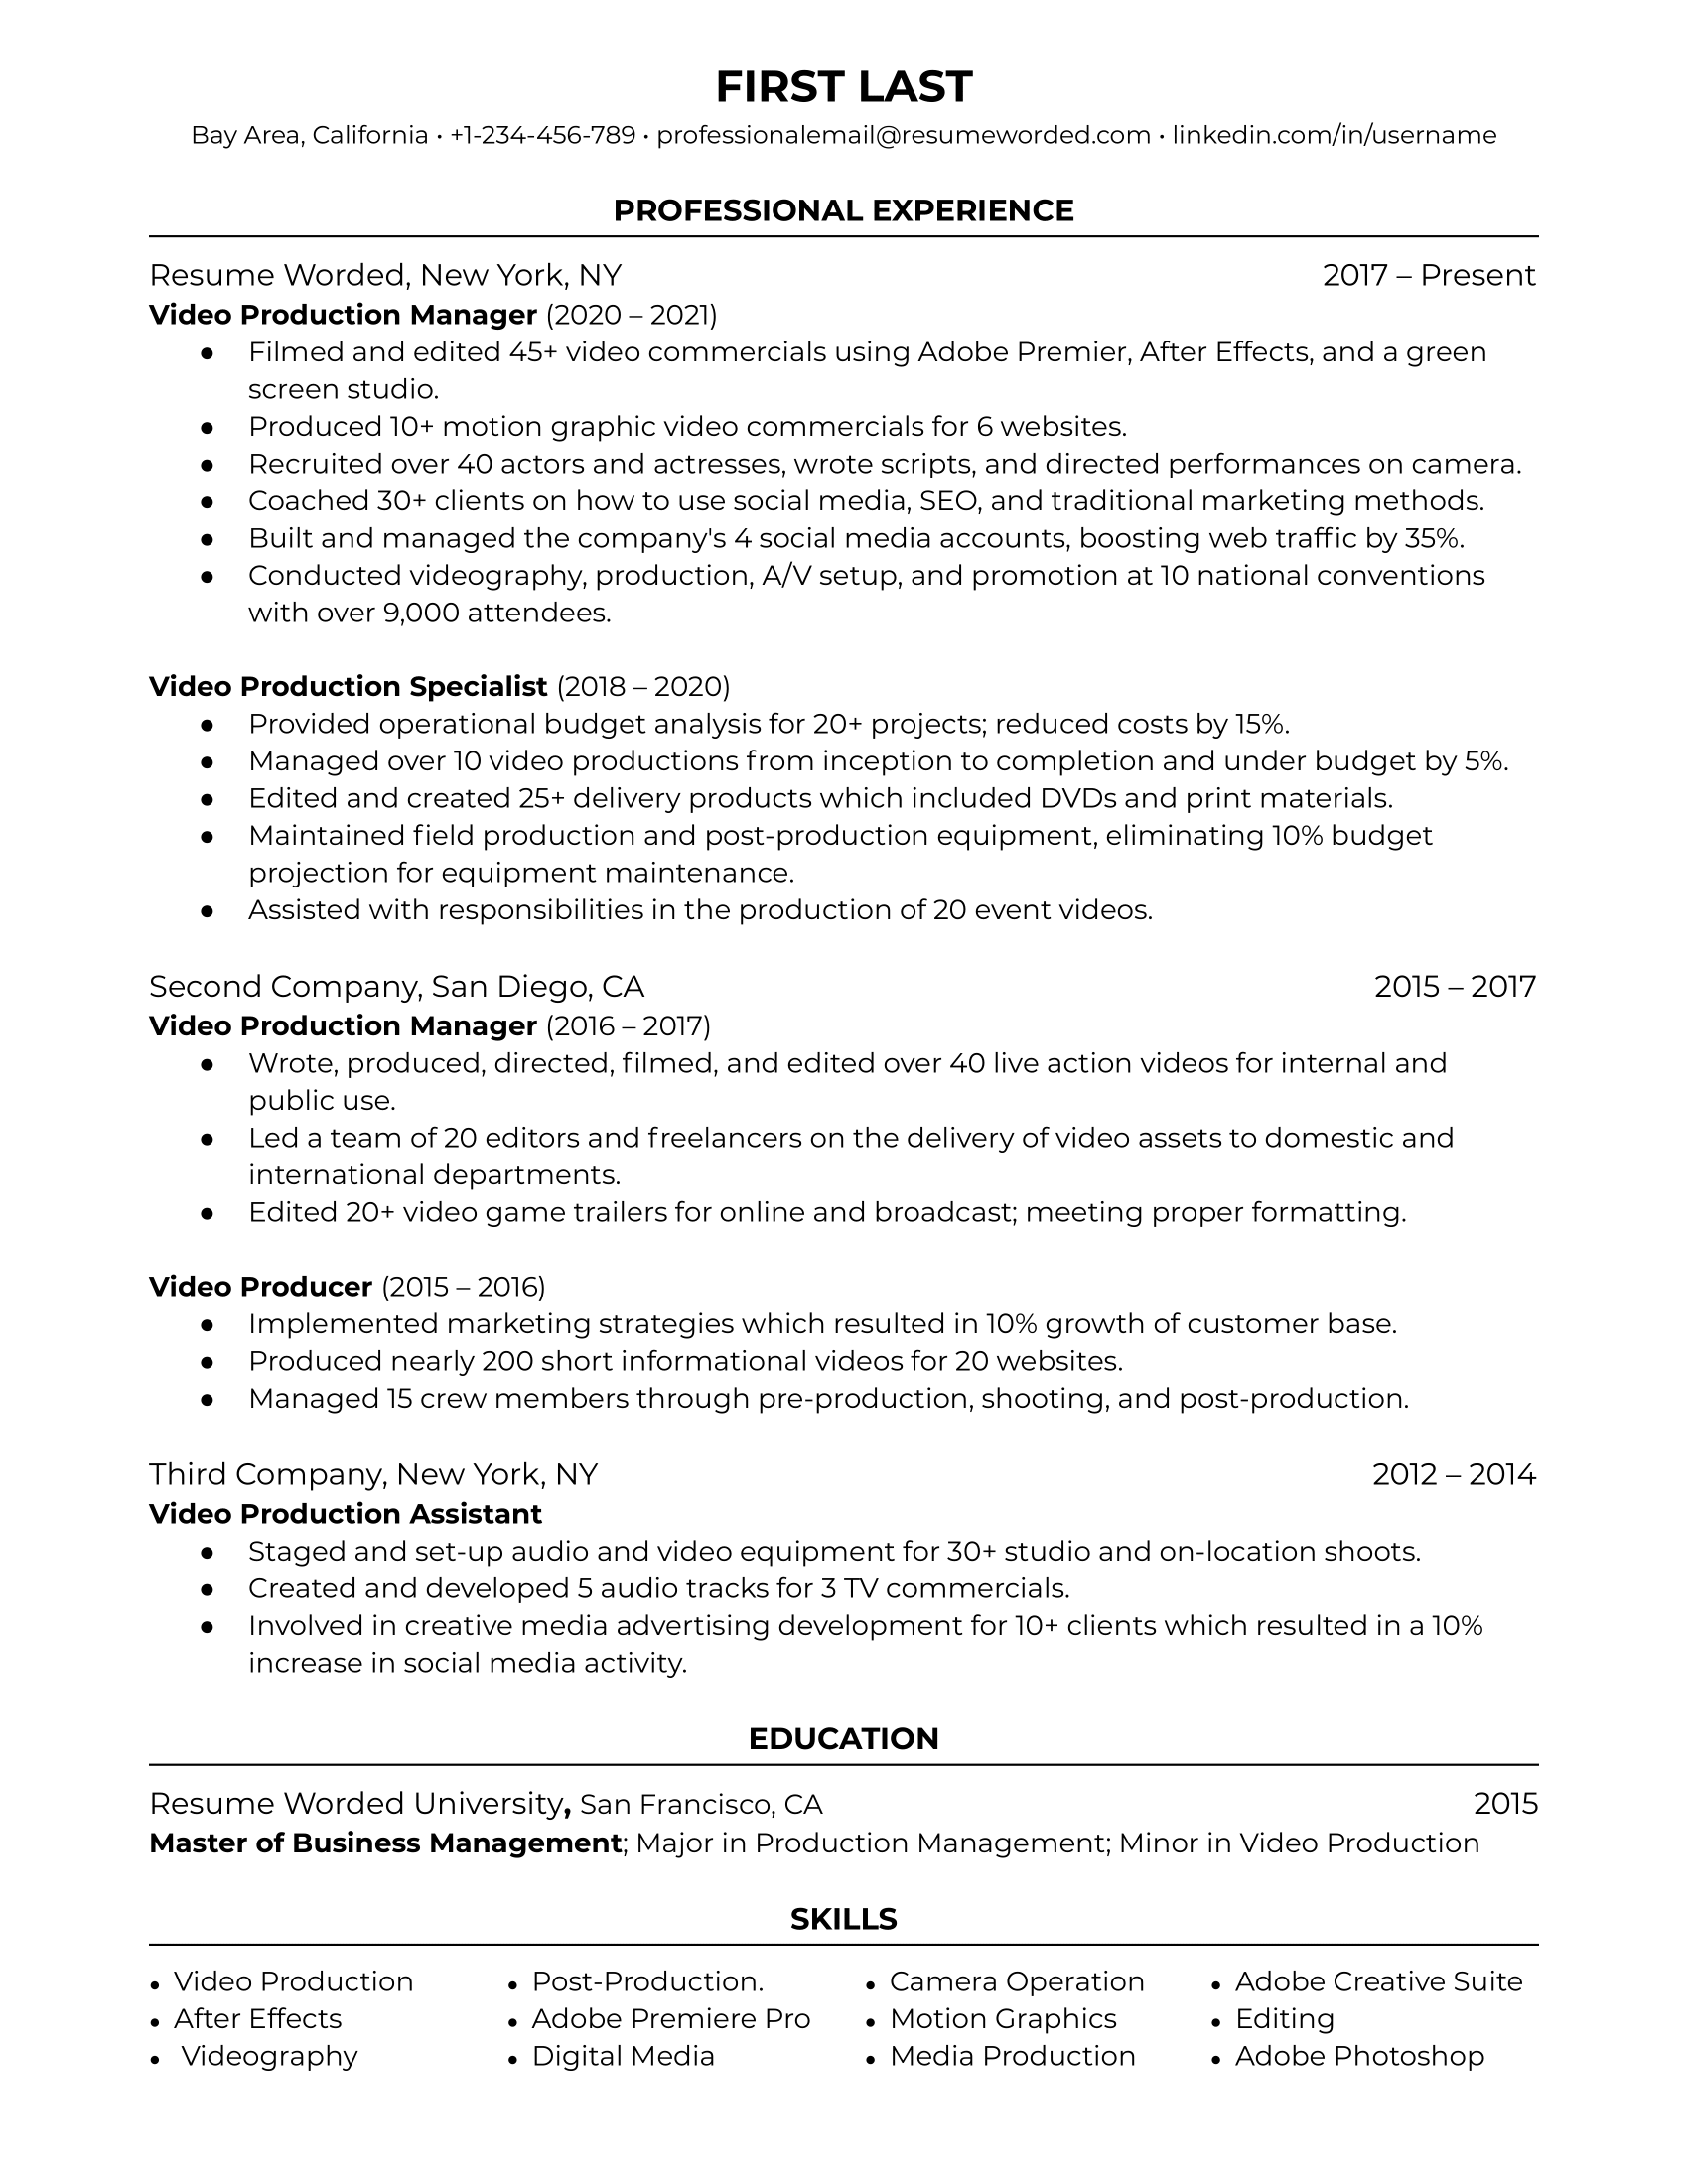 Video Production Manager Resume Template + Example